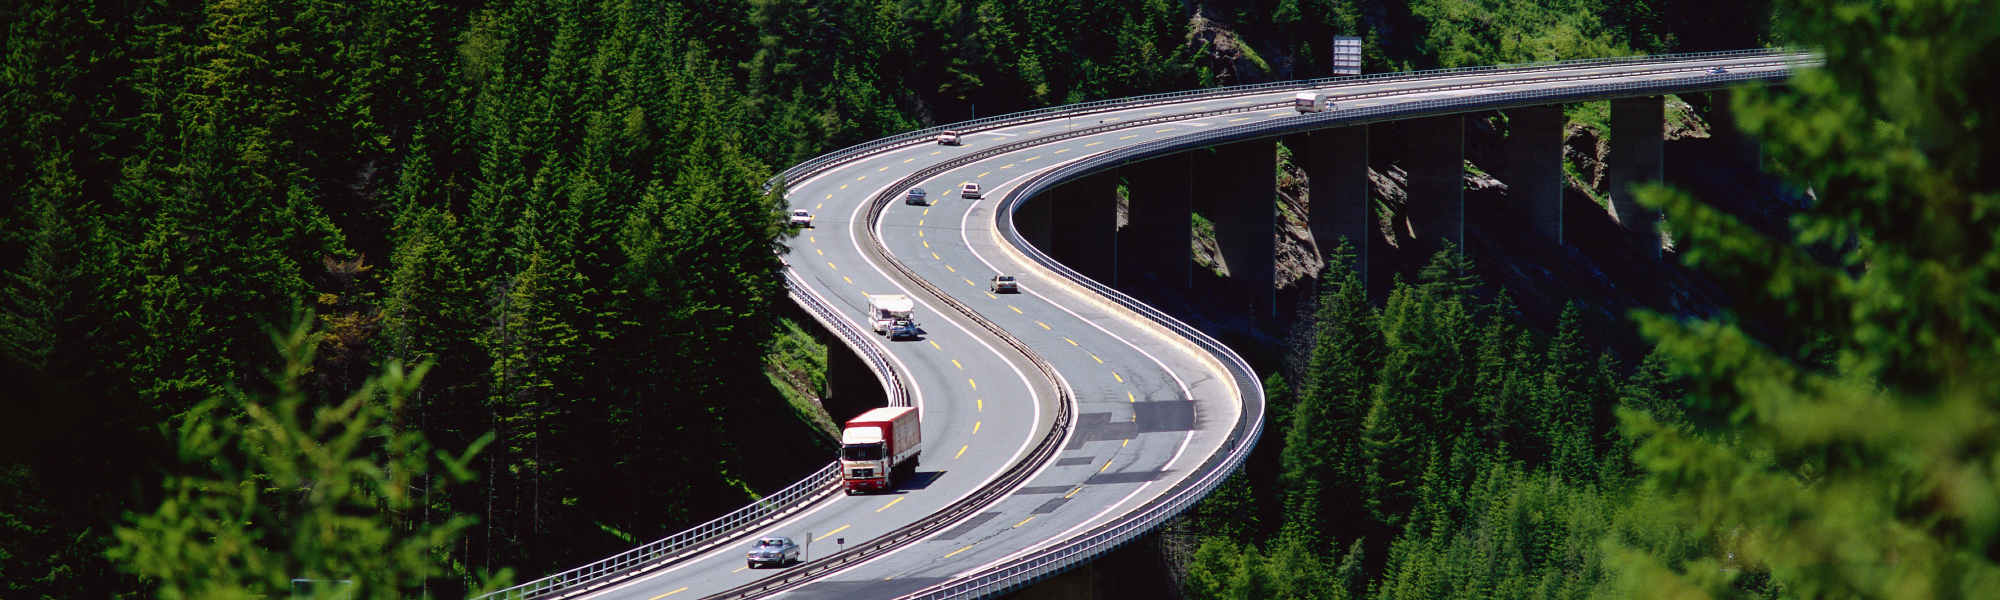 A single-lane restriction could disrupt millions of annual freight deliveries via the Brenner motorway, a key artery for European trade across the Alps. Leading transport and logistics associations urge the European Commission to act now and work with affected countries to find solutions.